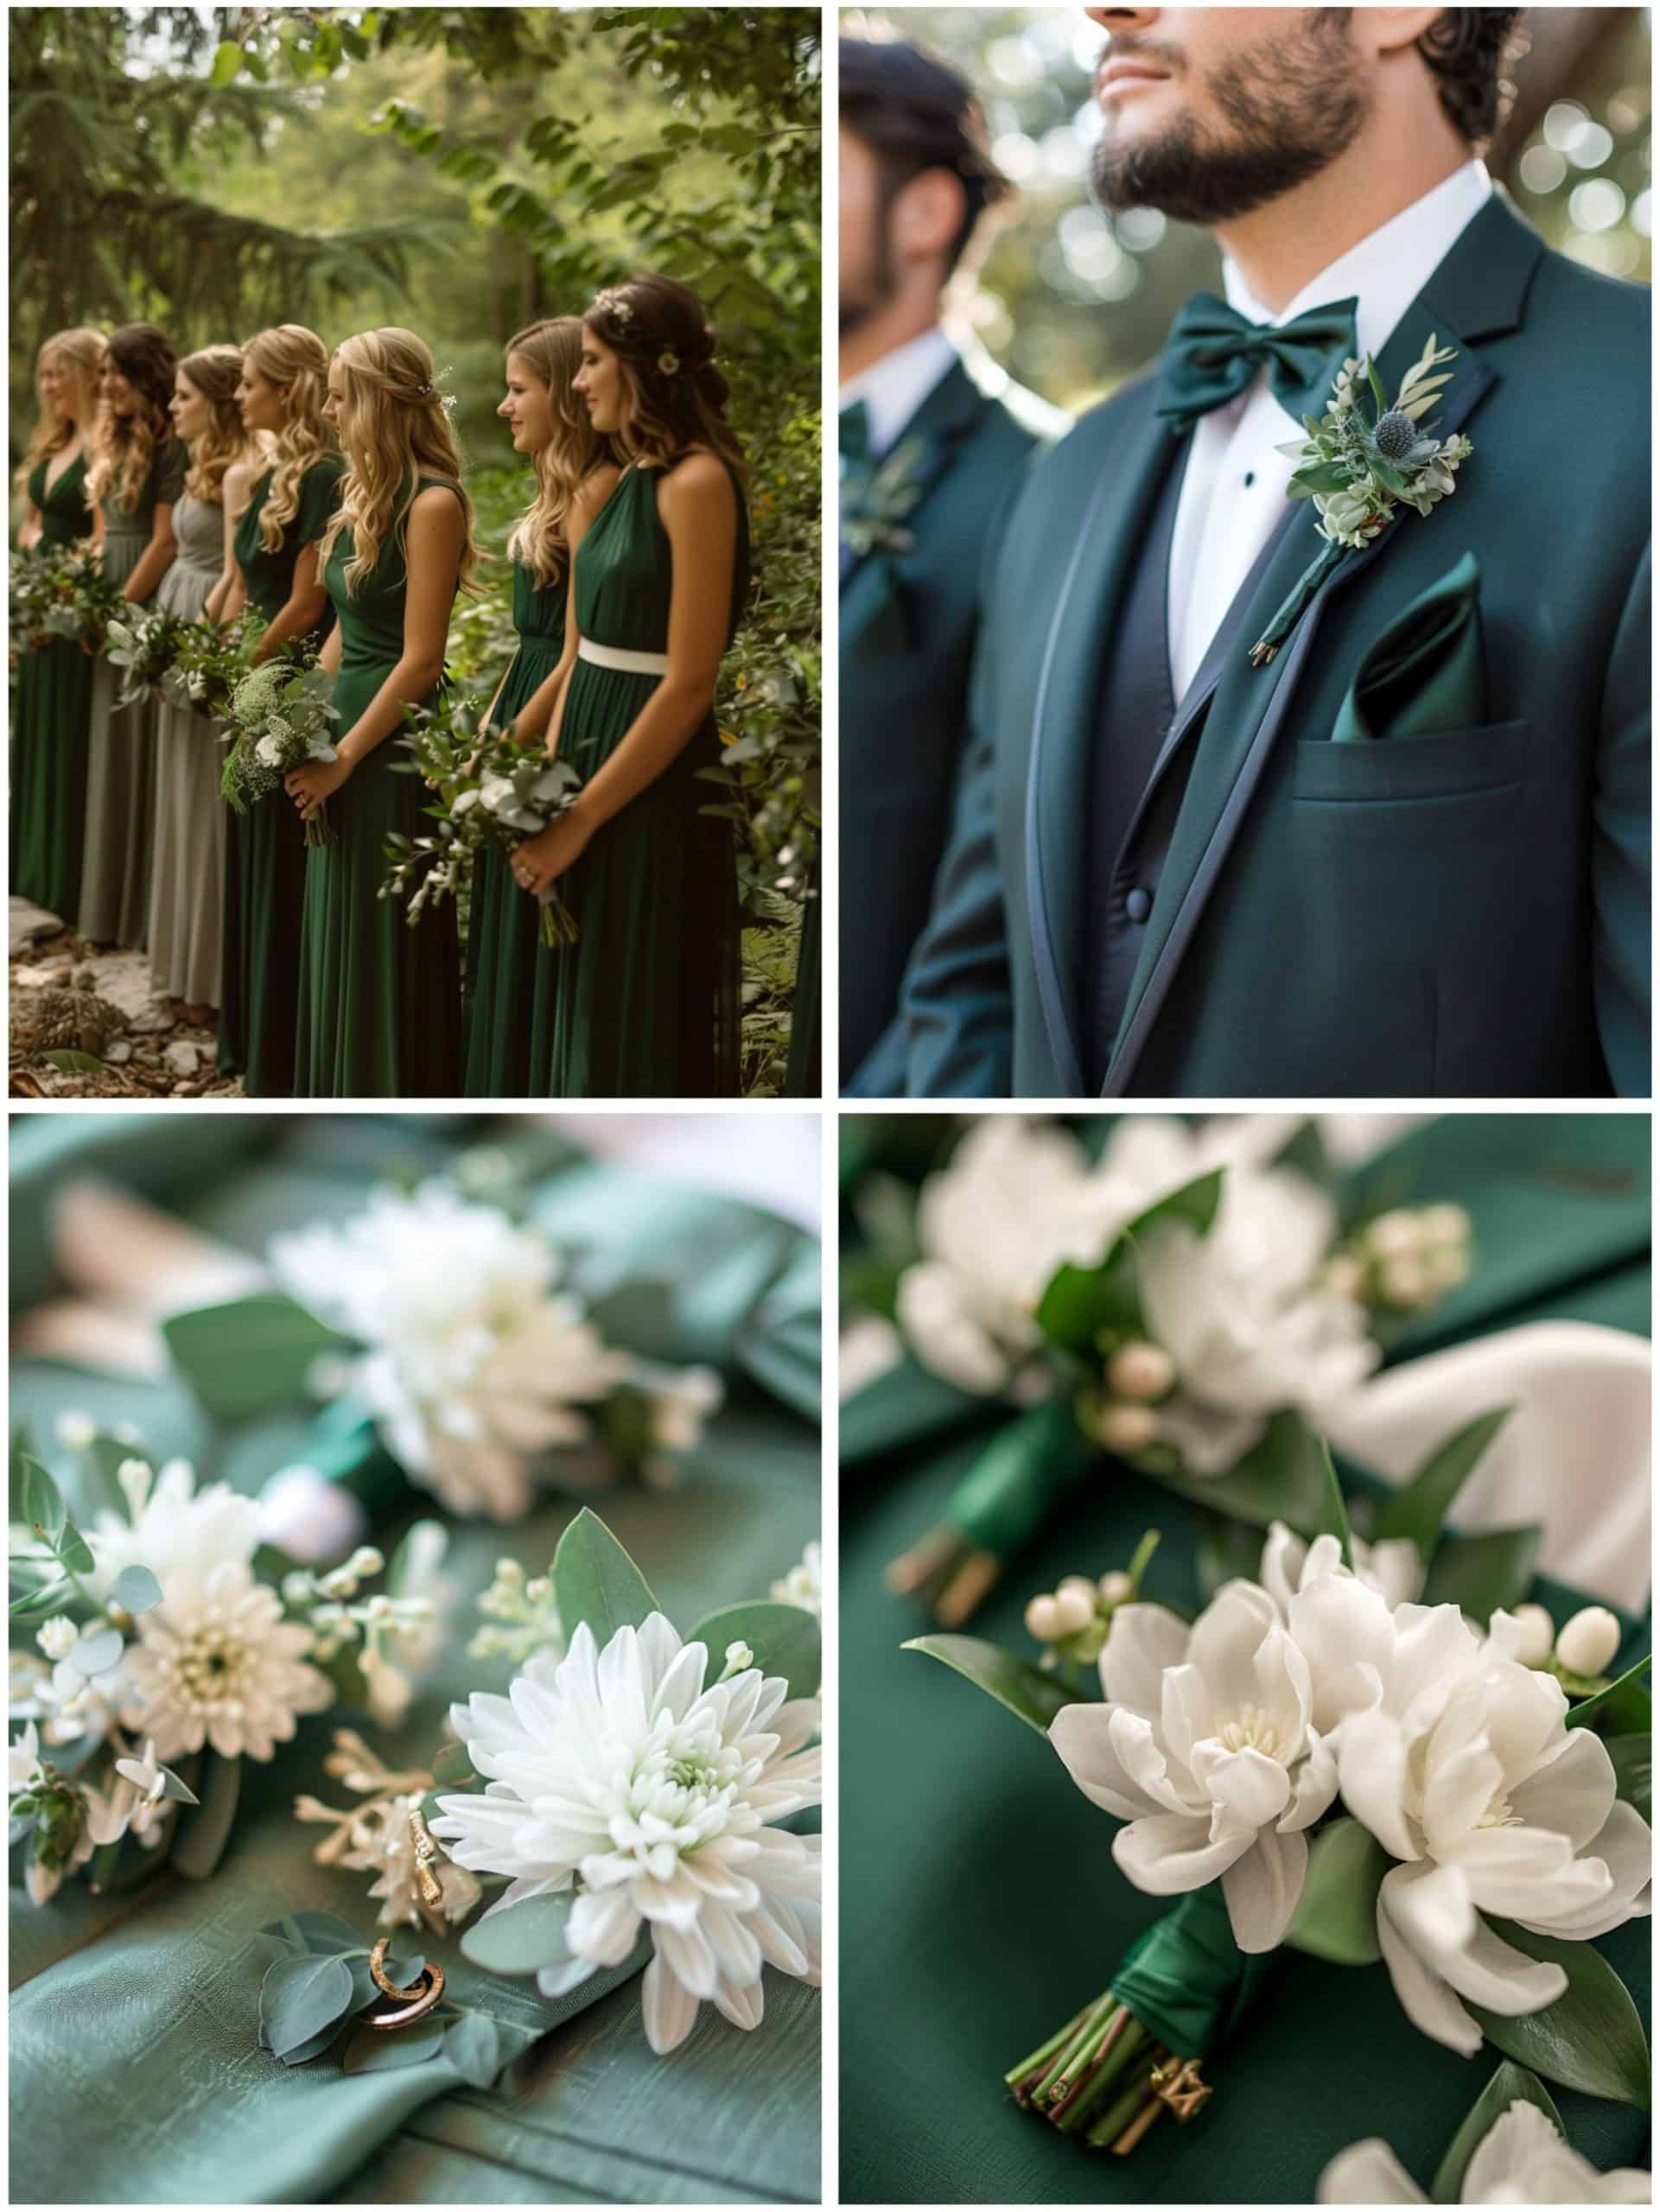 bridal party attire in green and white